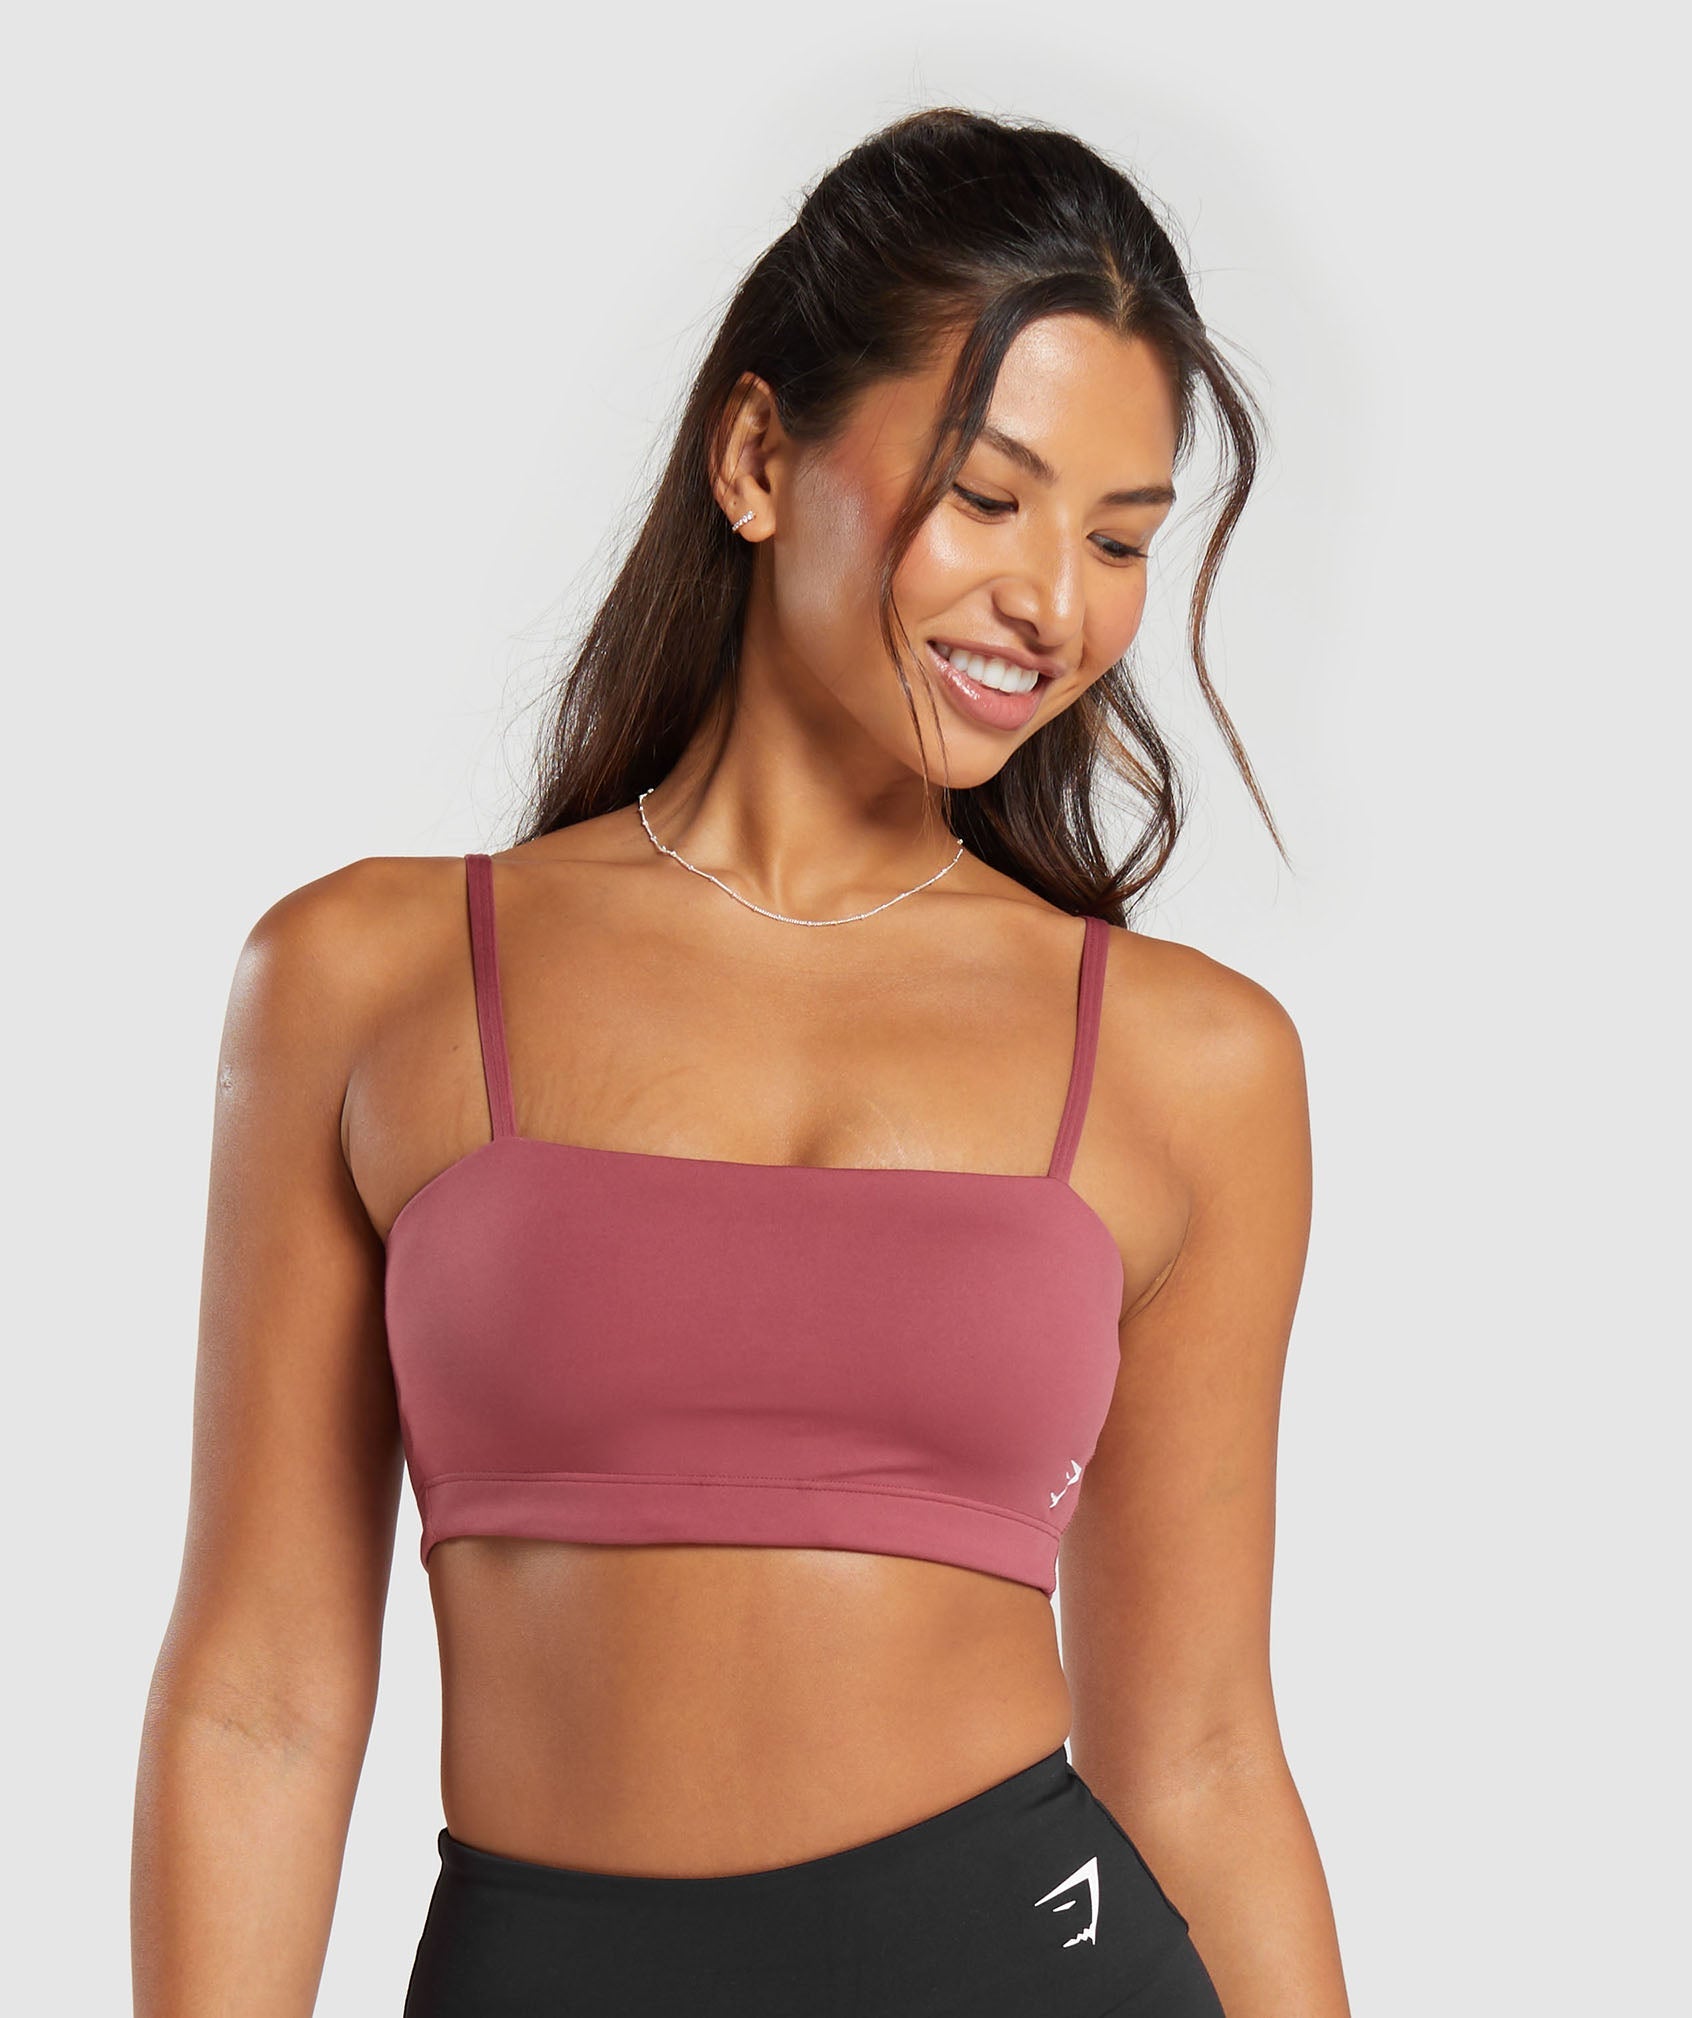 Bandeau Sports Bra in Soft Berry - view 1